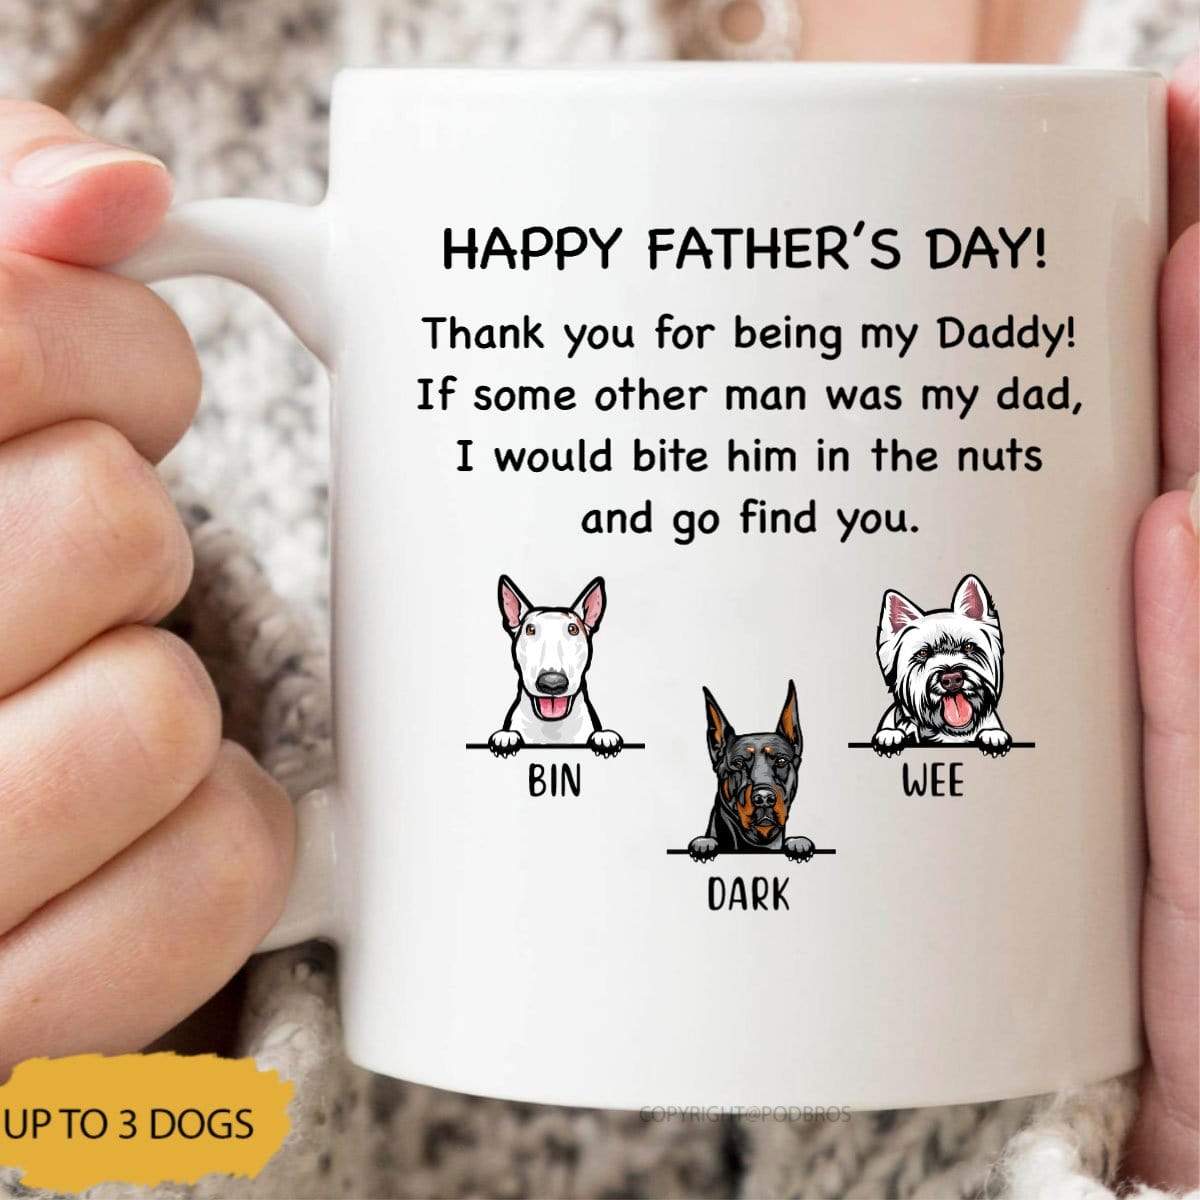 https://geckocustom.com/cdn/shop/products/geckocustom-personalized-custom-coffee-mug-dog-lover-gift-fathers-day-gift-thank-you-for-being-my-daddy-28840803008689_1200x1200.jpg?v=1624677284